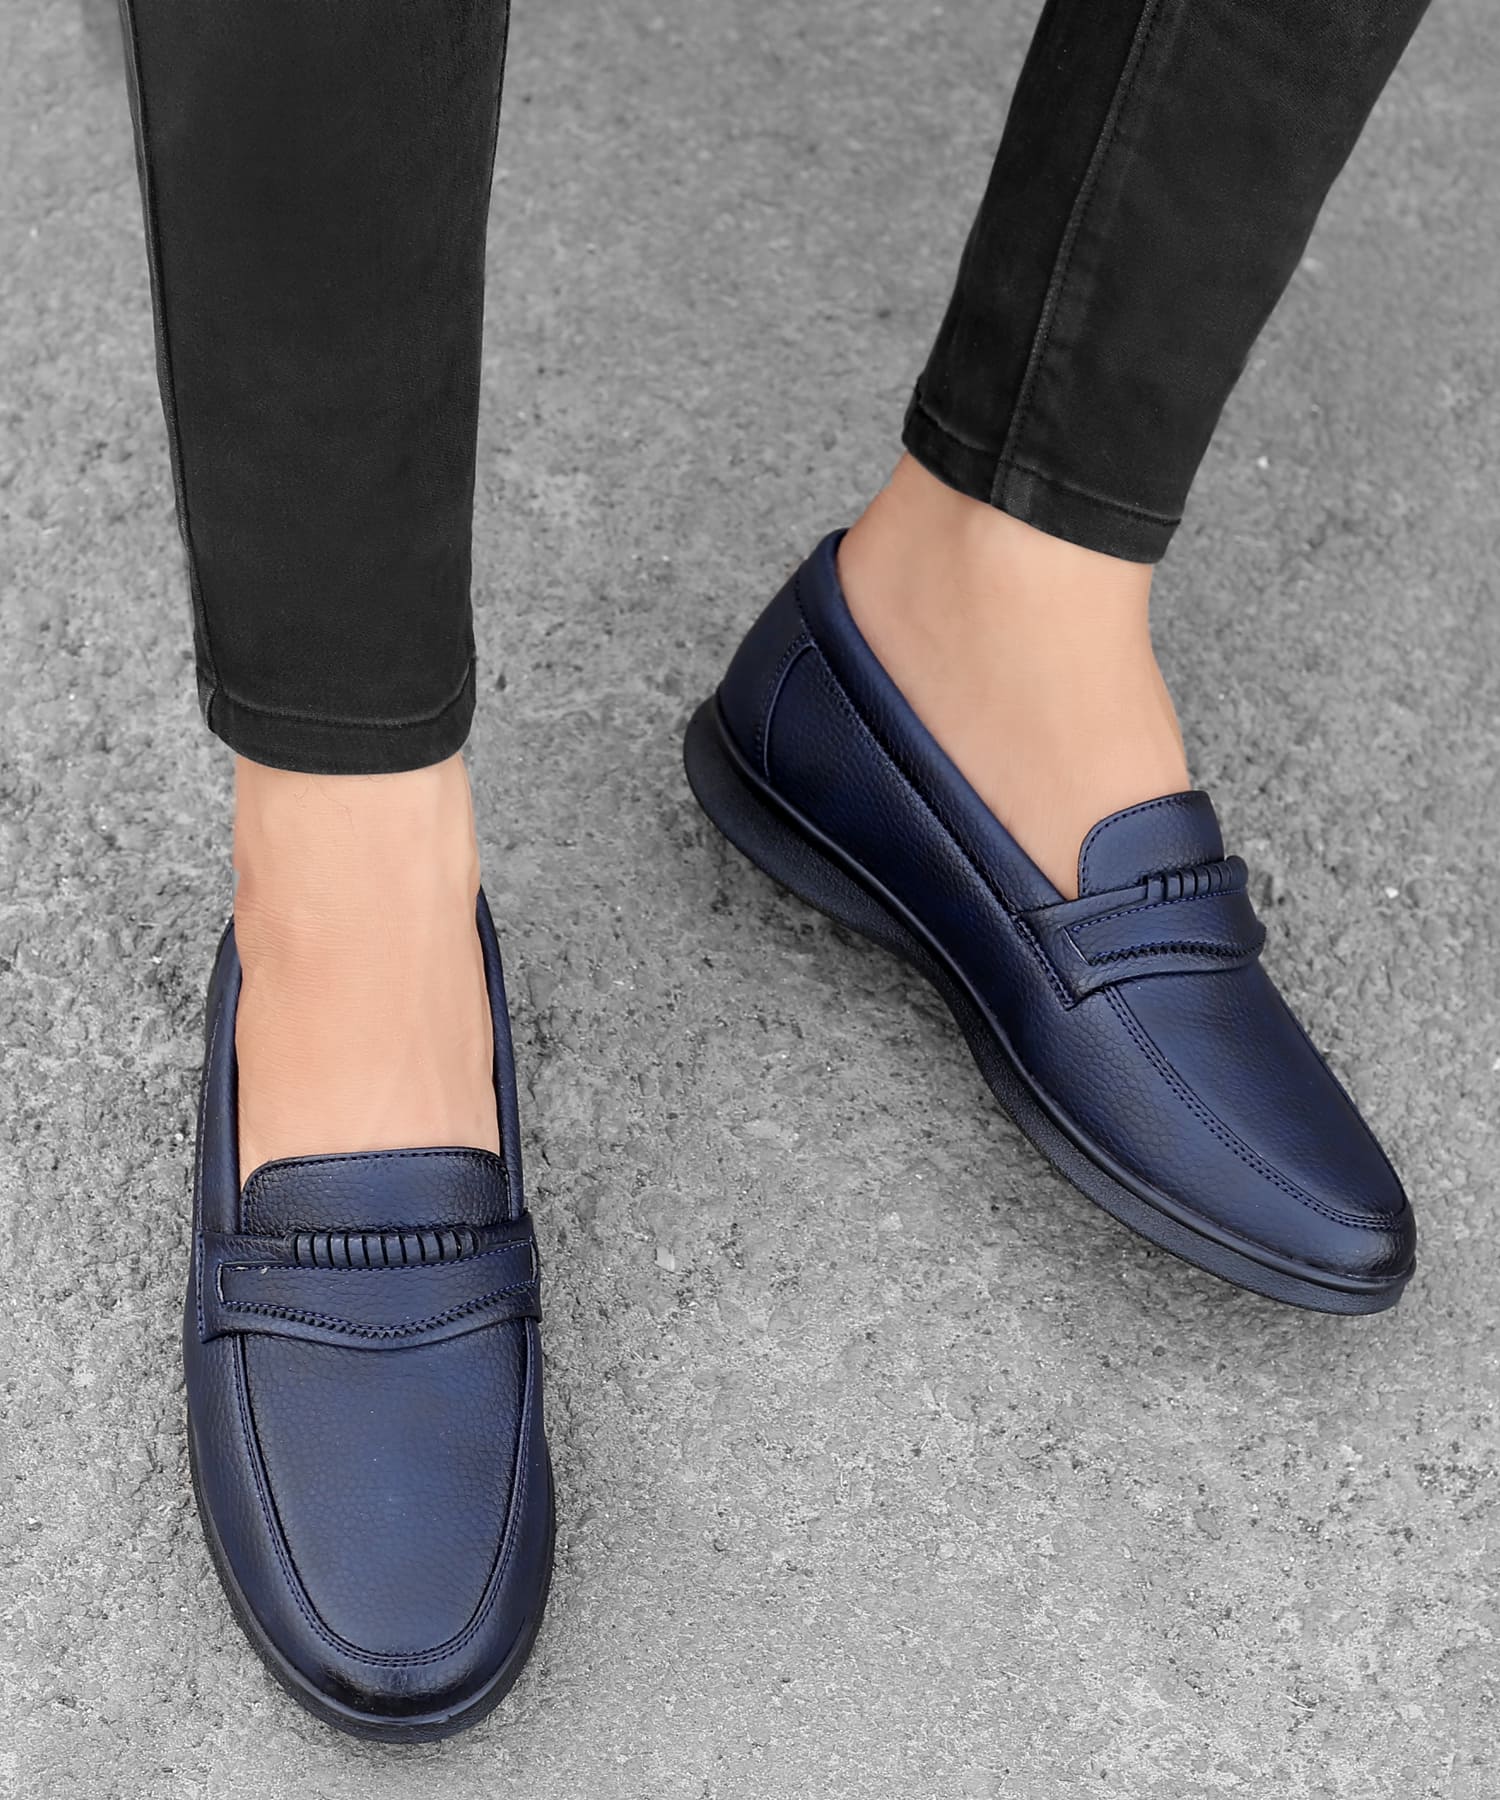 Loafer Shoes - Buy Latest Loafer Shoes For Men- Bacca Bucci